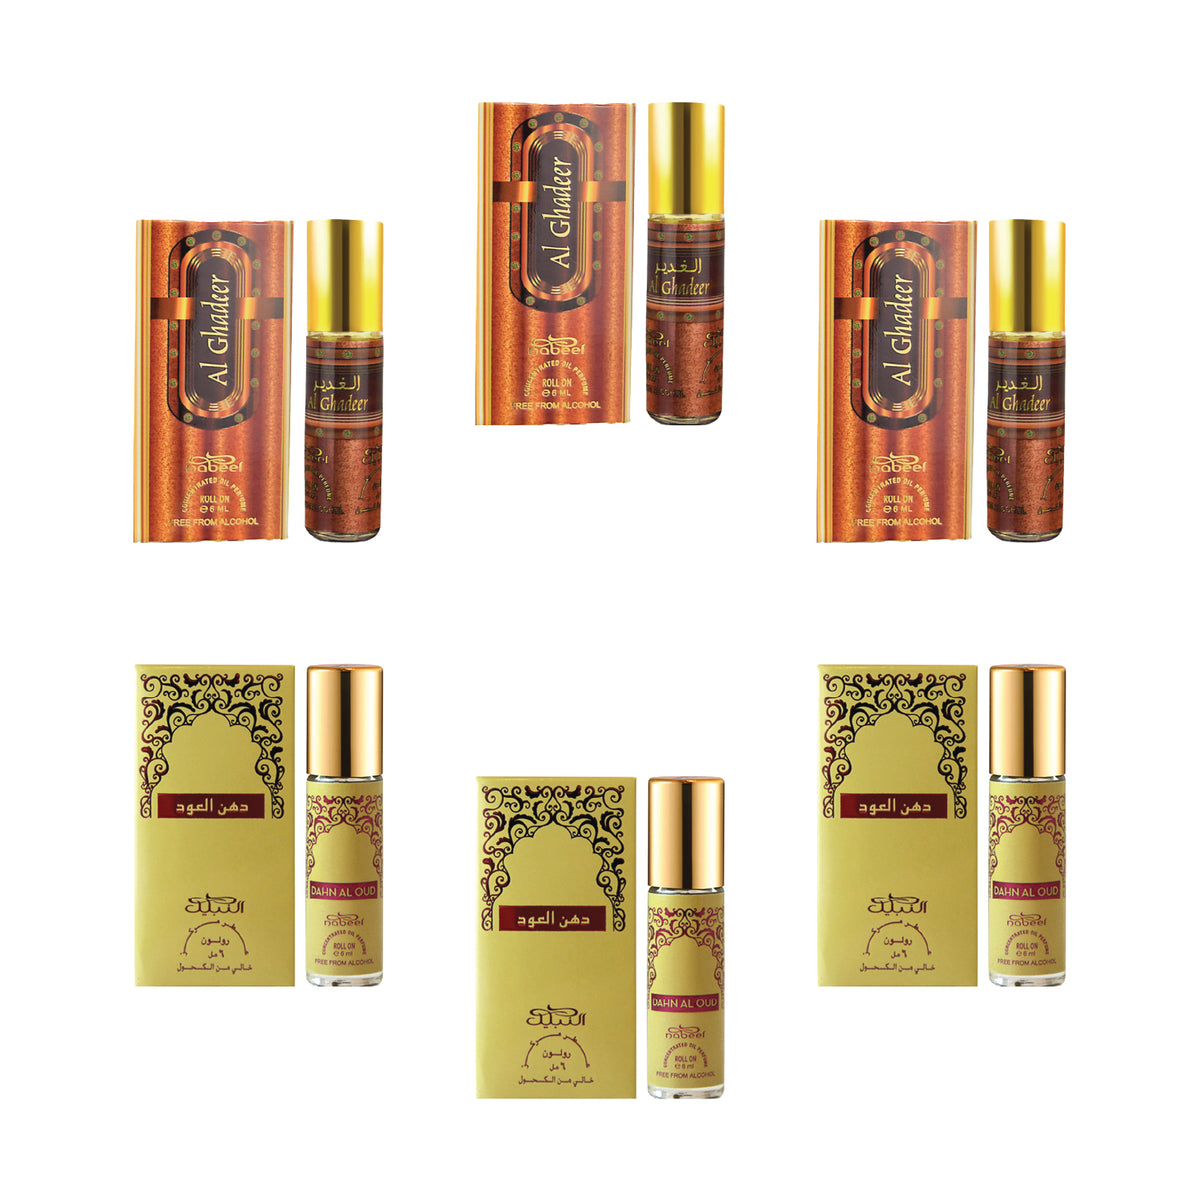 Nabeel - Premium Attar Roll-on Perfume Oil - Collection 2 - Al Ghadeer, Dahn Al Oud | 100% Non Alcoholic | Gift Set - 6ml (Pack of 6) | Made in U.A.E